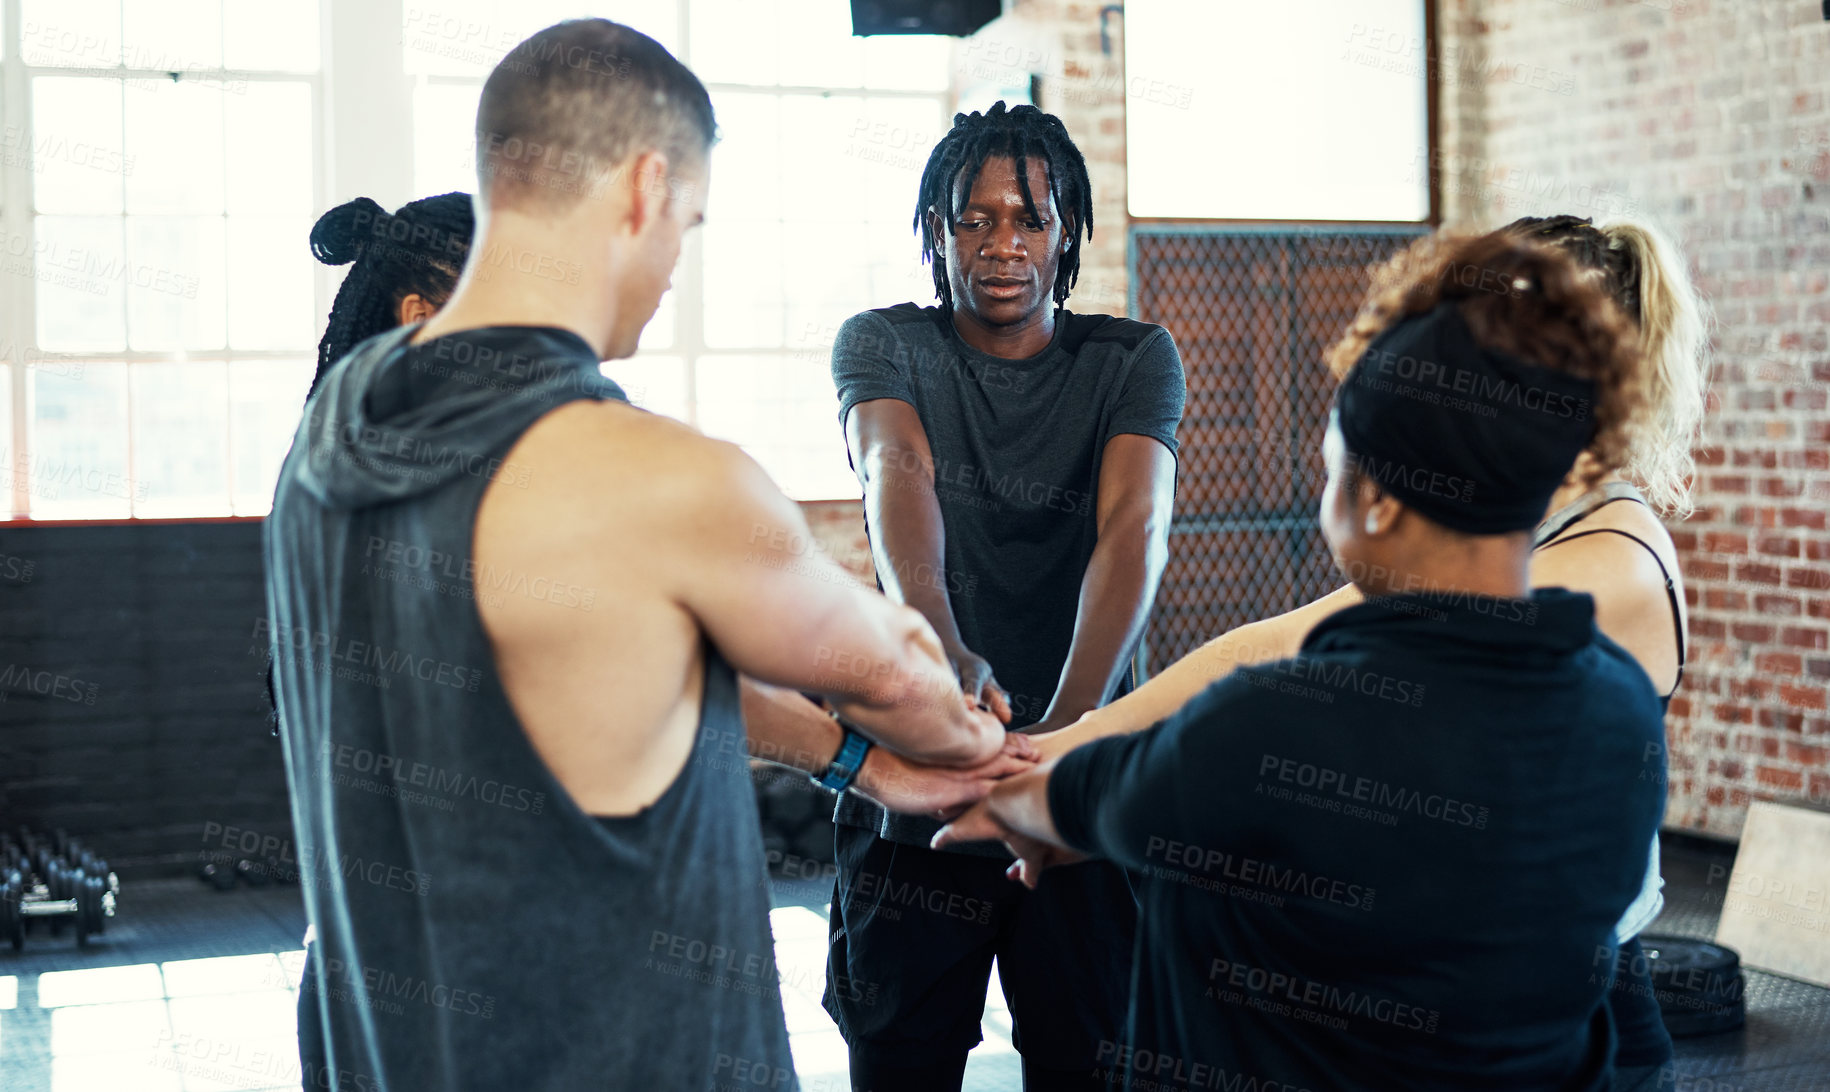 Buy stock photo Shot of a focused young group of people forming a huddle together before a workout session in a gym